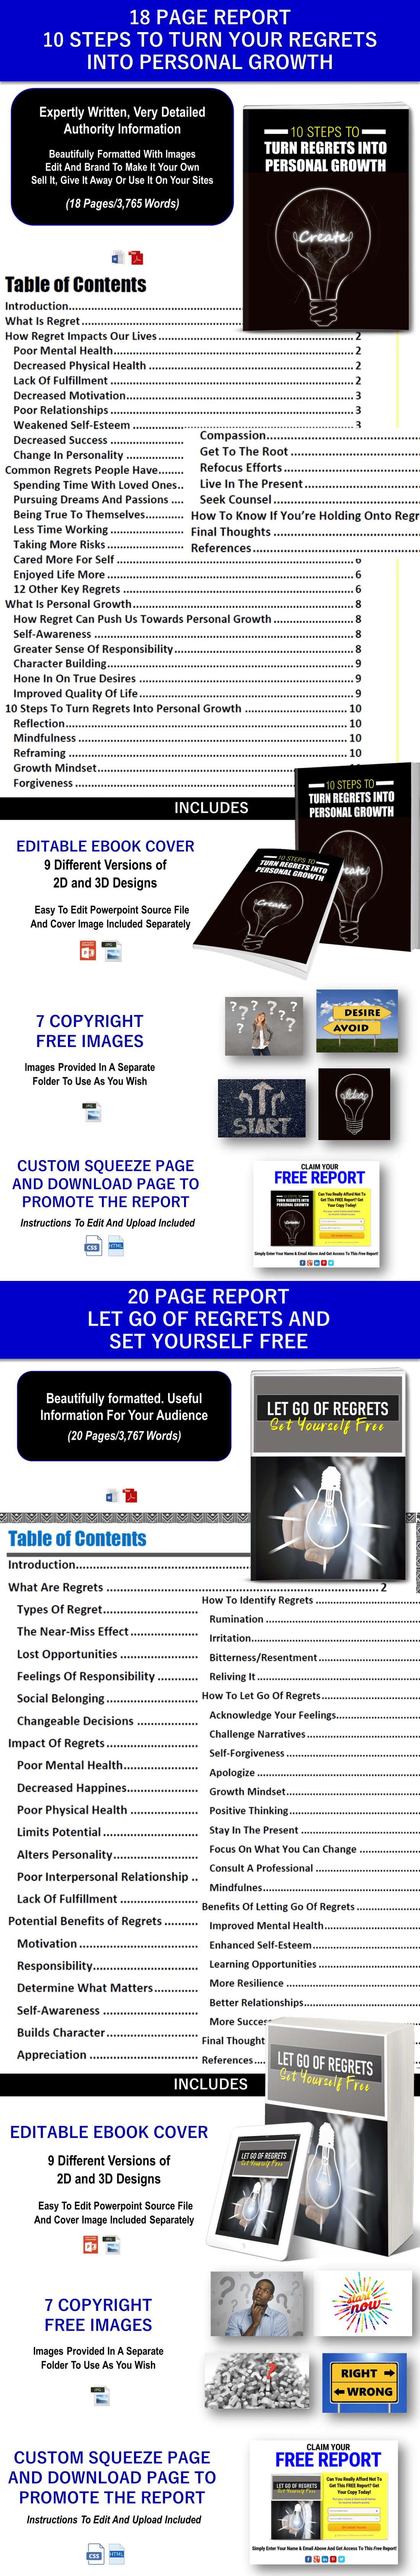 Let Go Of And Learn From Regrets Content With PLR Rights